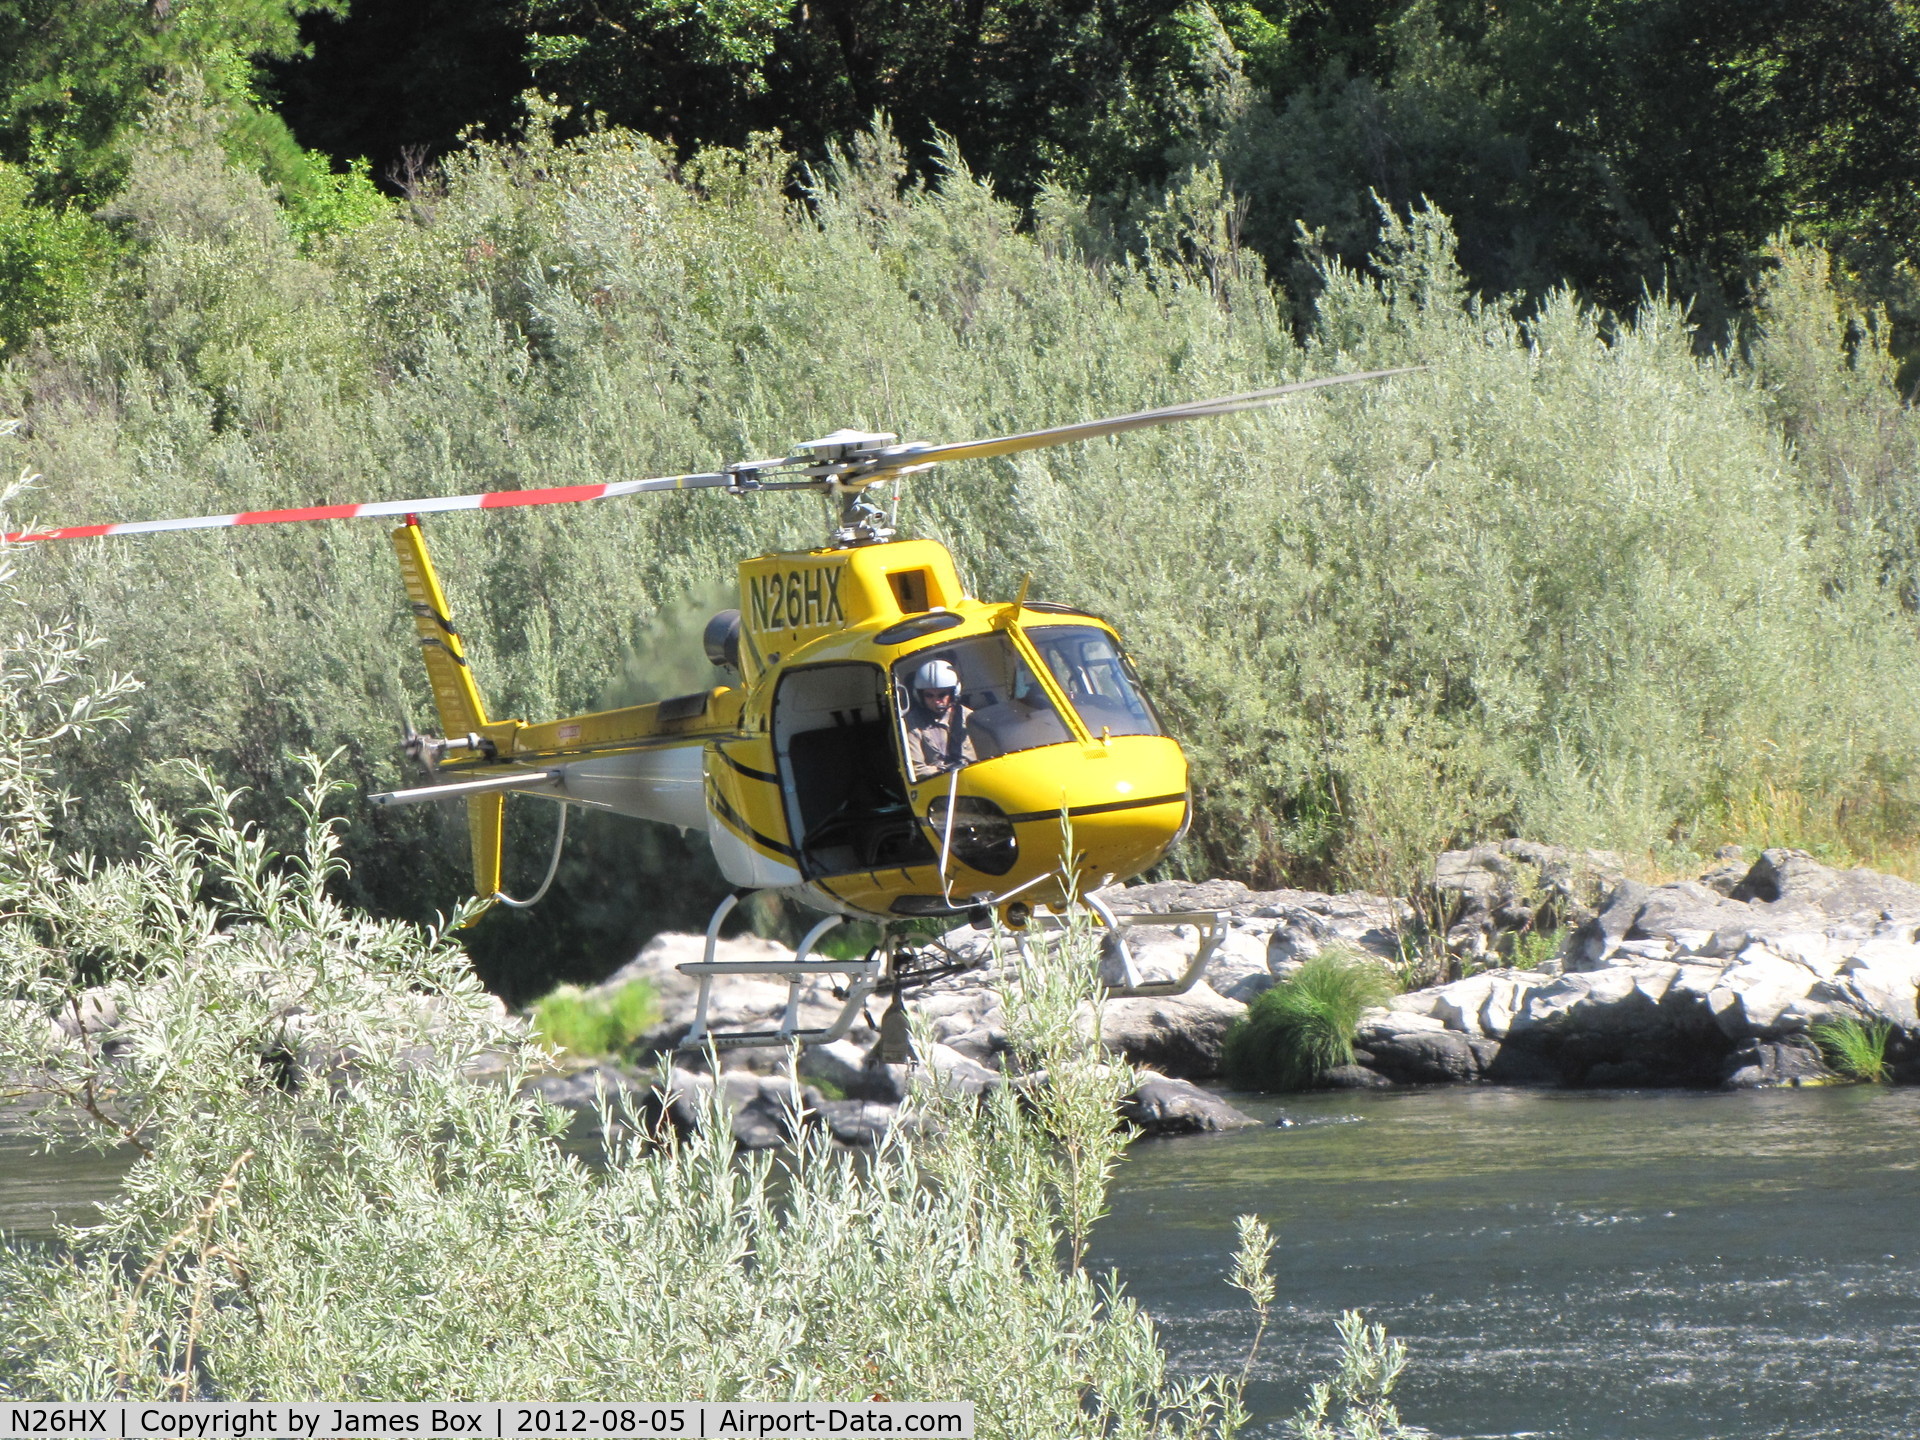 N26HX, 2007 Eurocopter AS-350B-3 Ecureuil Ecureuil C/N 4385, fire fighting in Aug. 2012, taking water from the Klamath River near Seiad, California